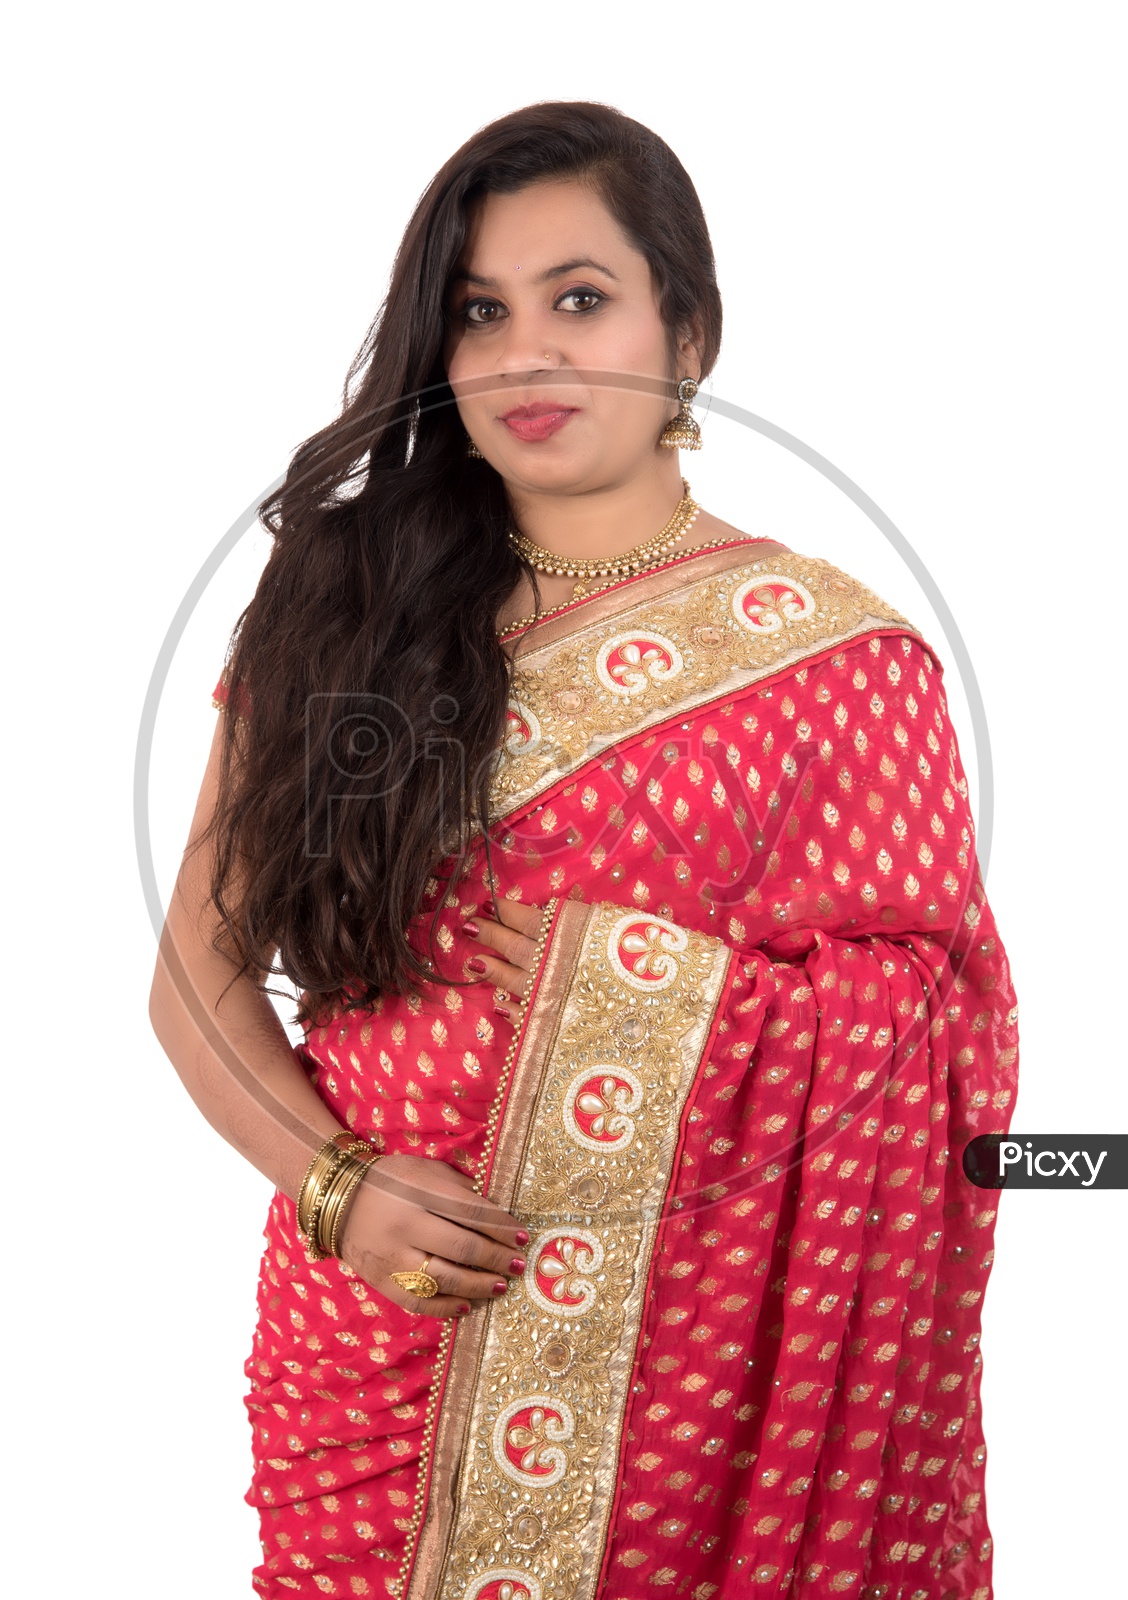 Indian Women In Traditional National Clothes Posing Stock Illustration -  Download Image Now - iStock